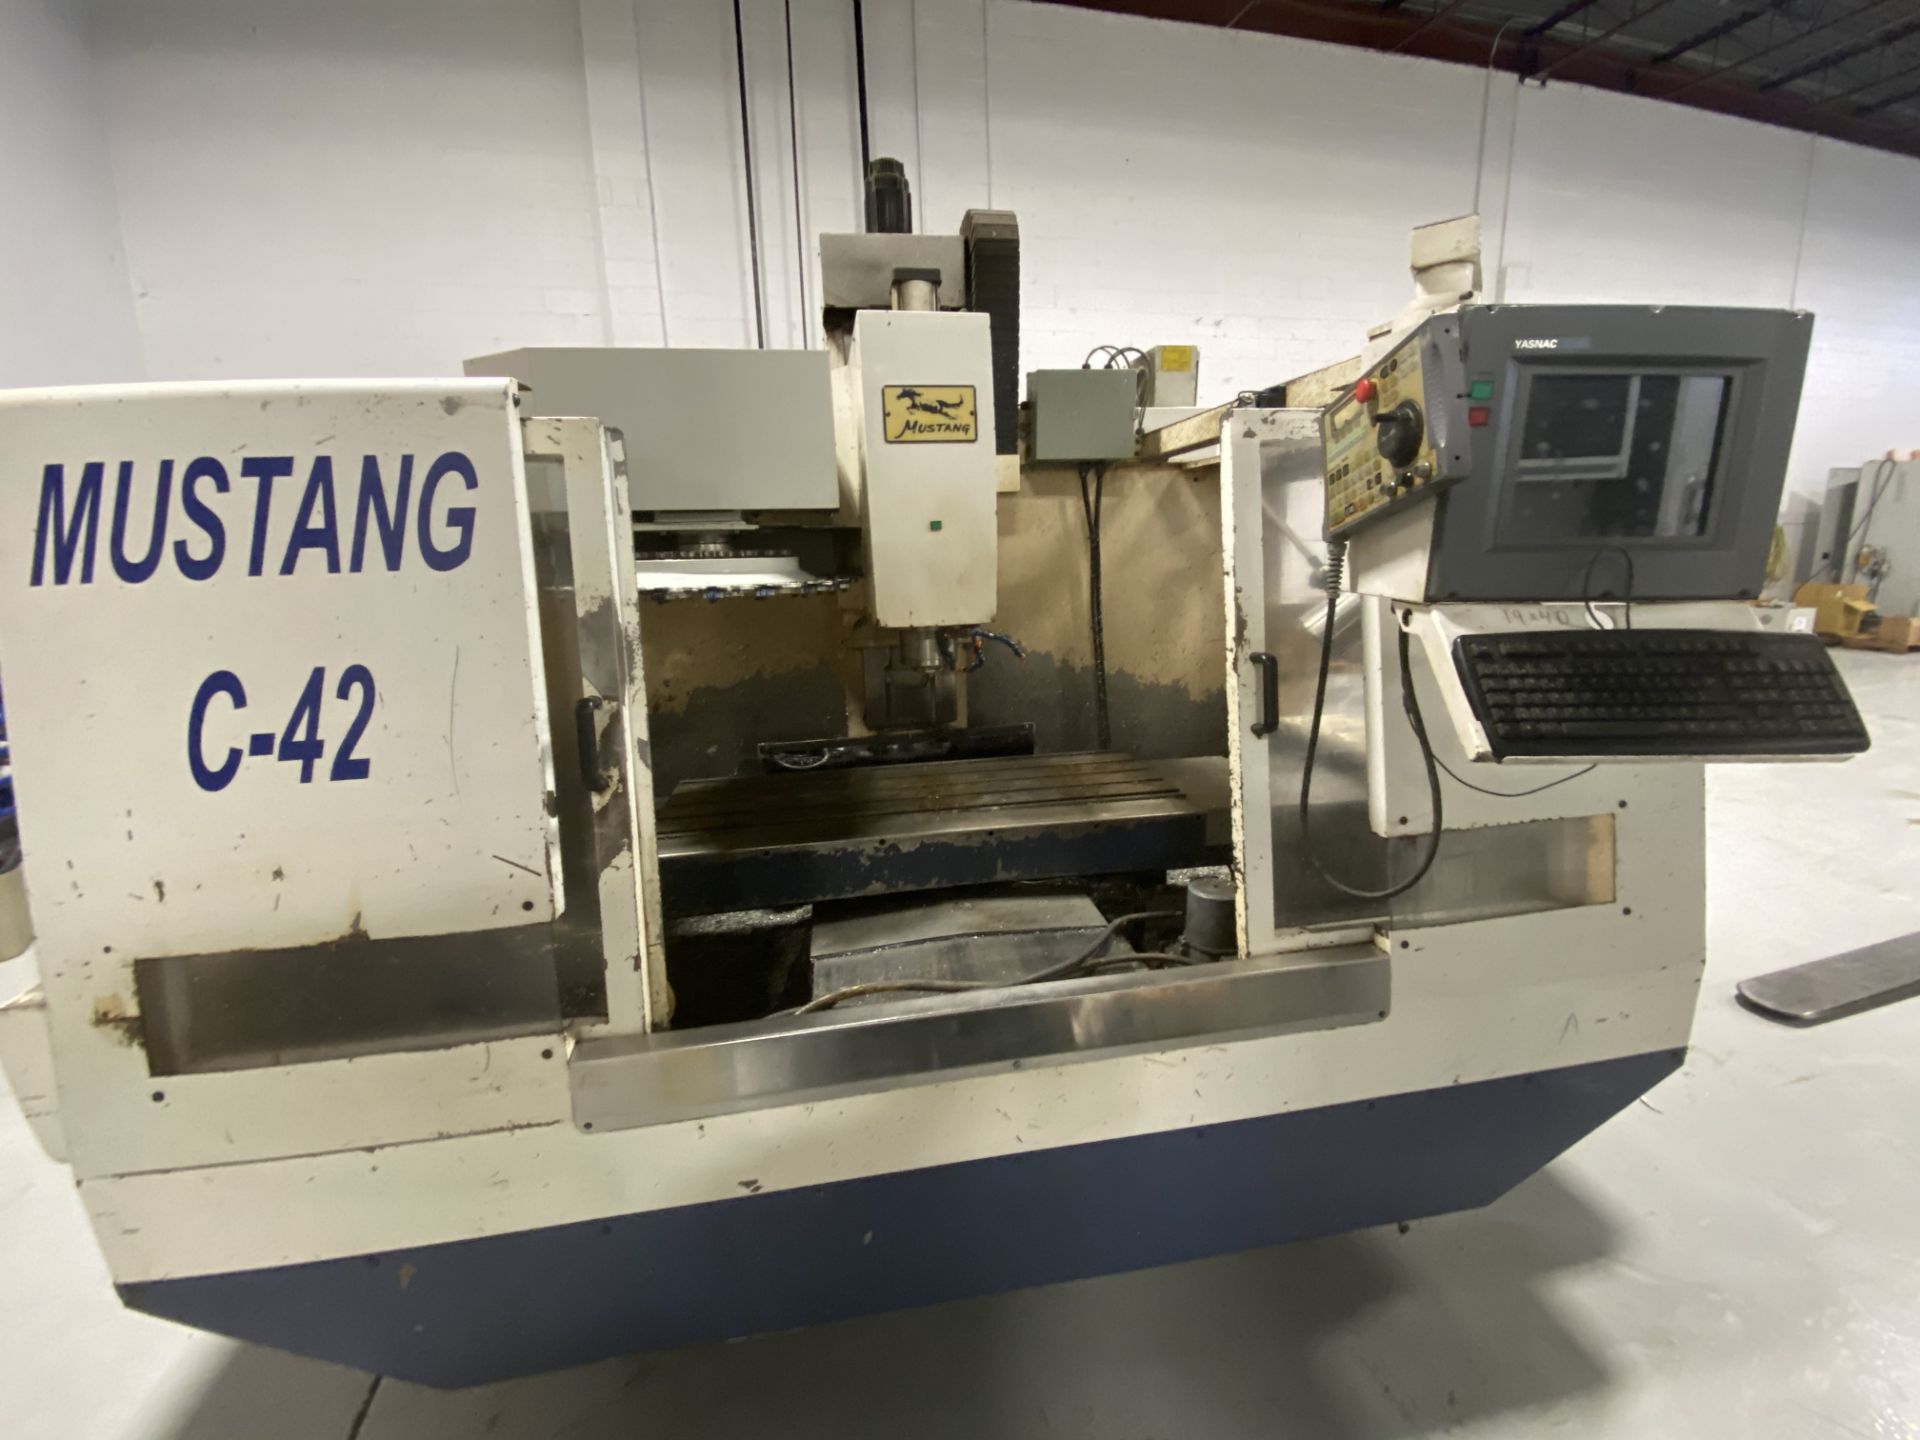 CNC MUSTANG C42 MILLING MACHINE, LOCATION, MONTREAL, QUEBEC